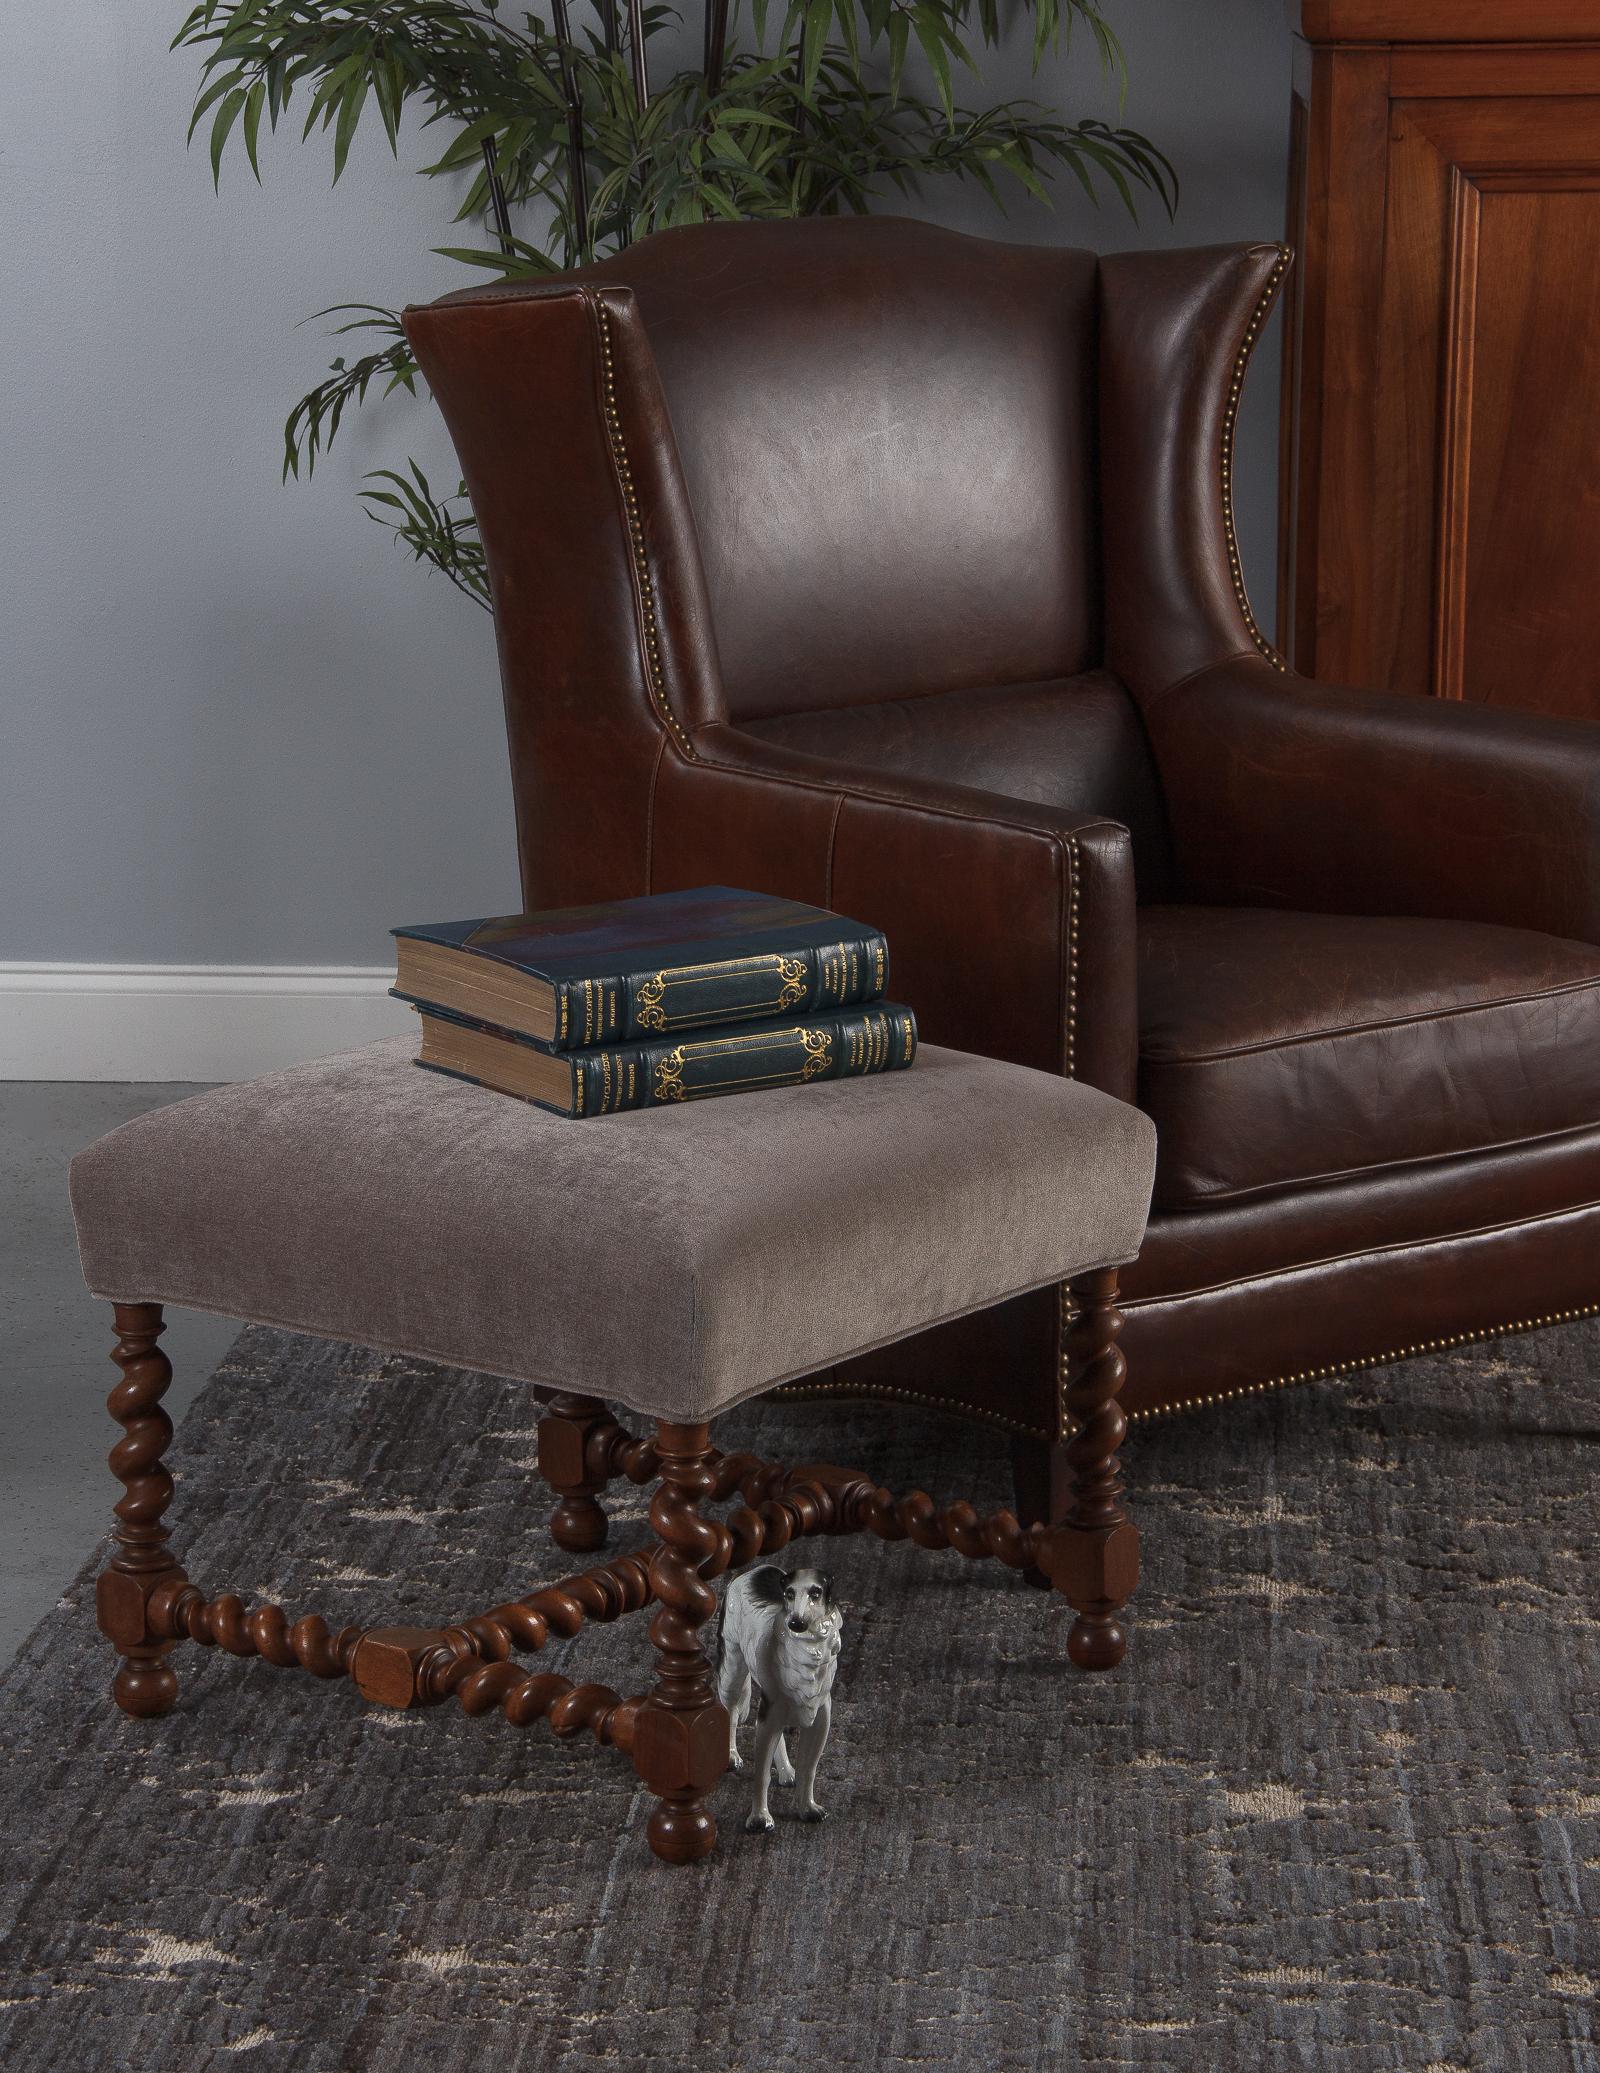 A large vintage Louis XIII style walnut ottoman in taupe upholstery from France, circa 1920s. The rich brown walnut frame has elegant barley twist construction with a sturdy H-stretcher and block die joints. Round bun feet with incised lines for